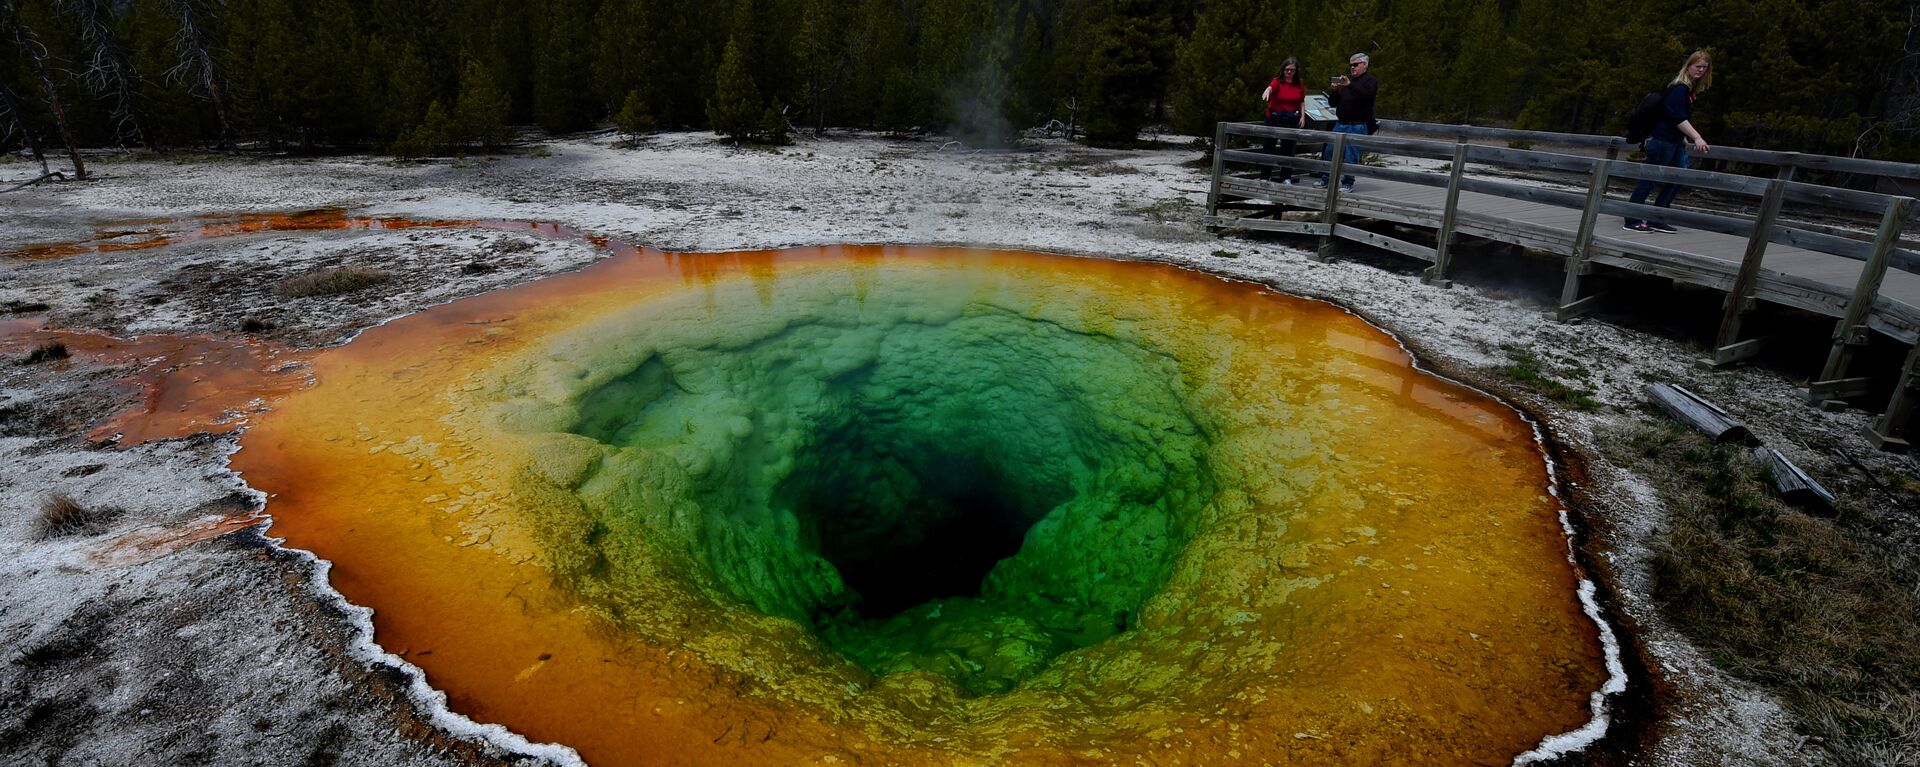 Tourists view the Morning Glory hot spring in the Upper Geyser Basin of Yellowstone National Park in Wyoming (File). - Sputnik International, 1920, 14.02.2021